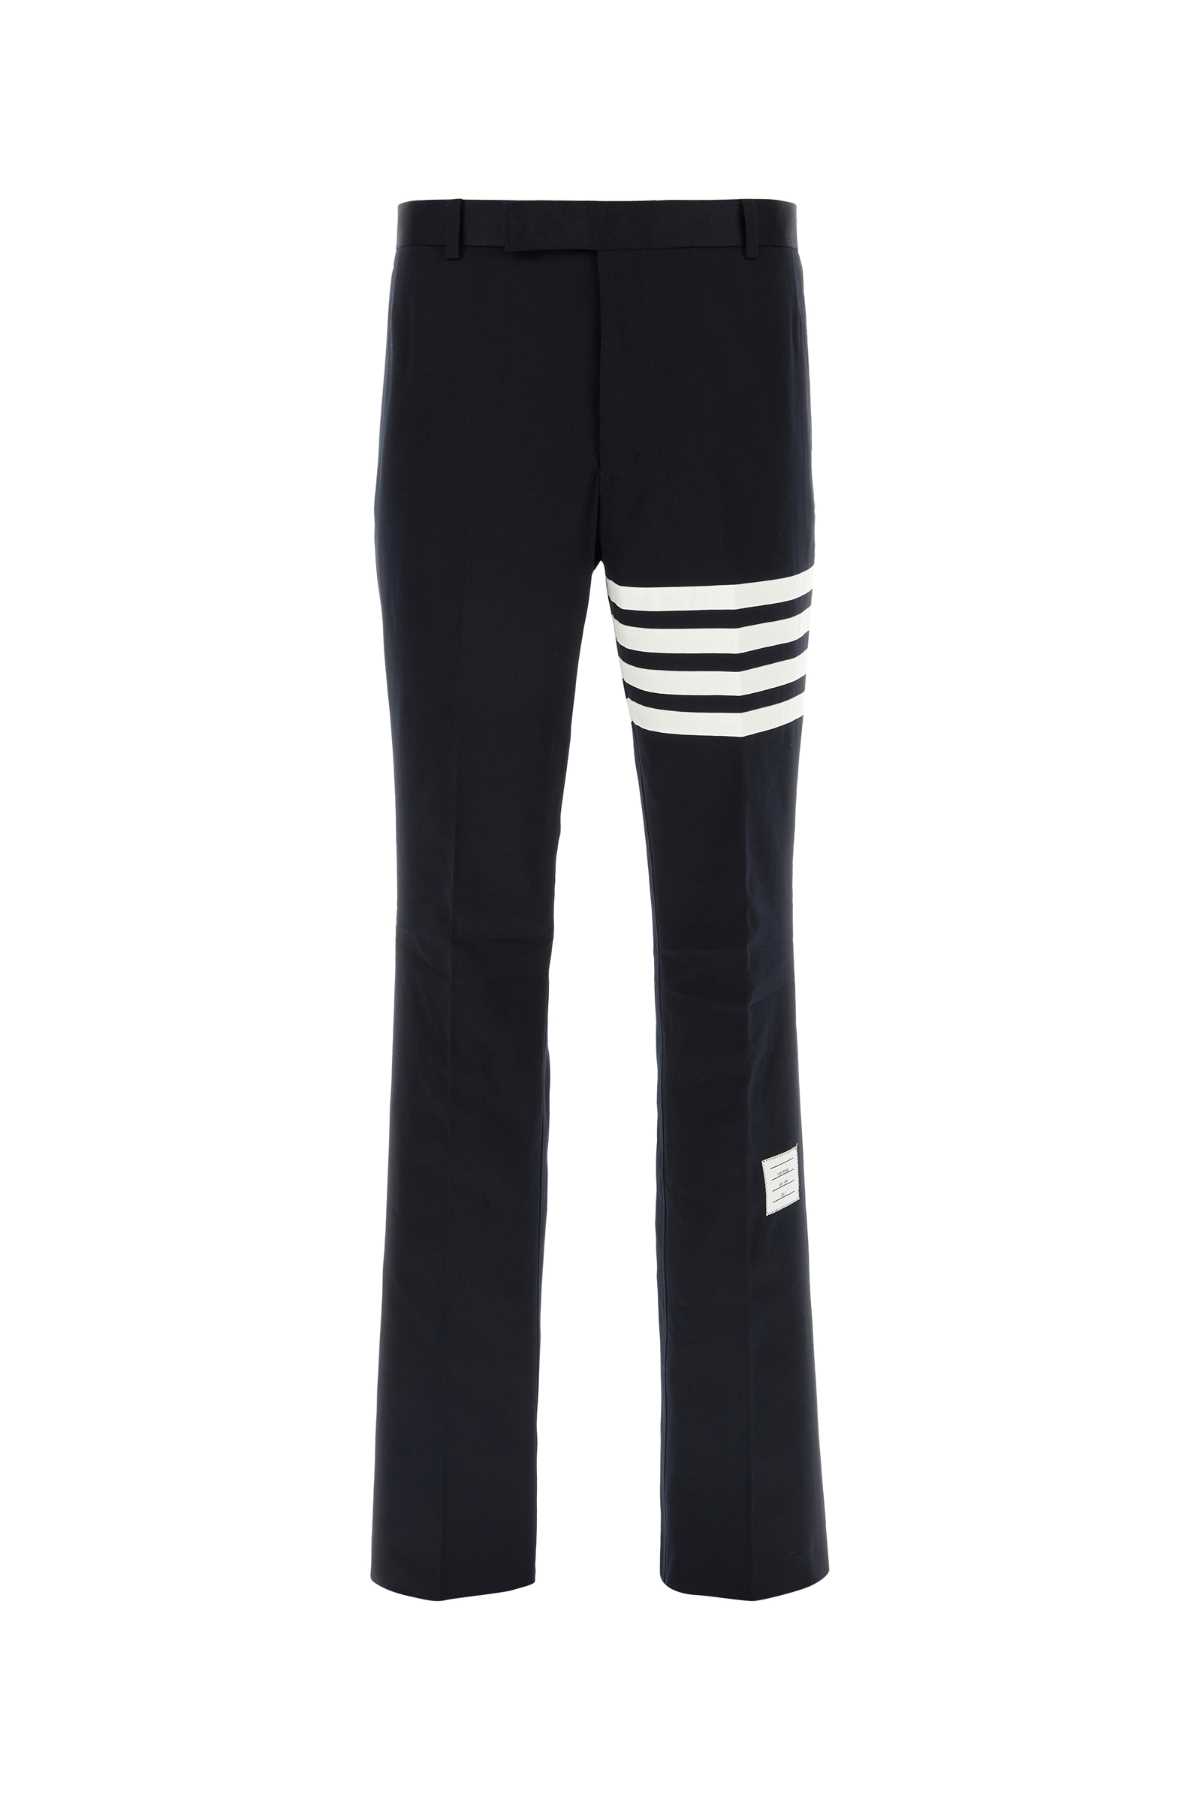 Shop Thom Browne Navy Blue Cotton Pant In 0506